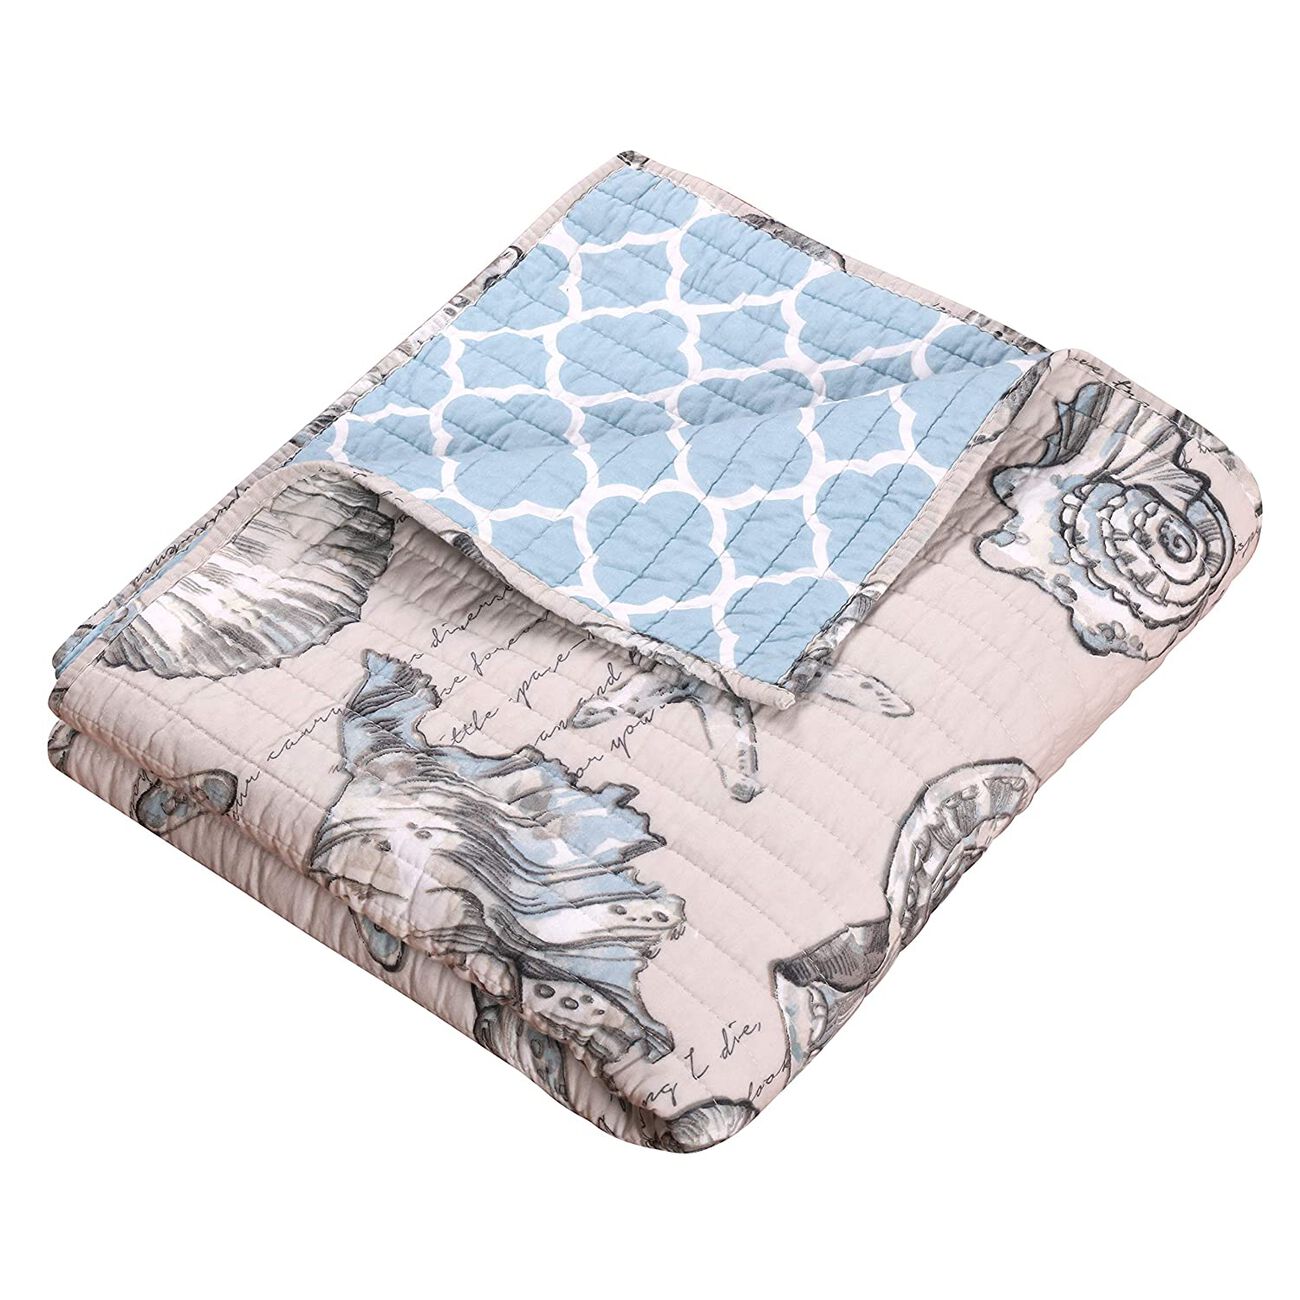 Madrid Beach Print Reversible Throw Blanket with Fabric Bound Edges,White and Gray